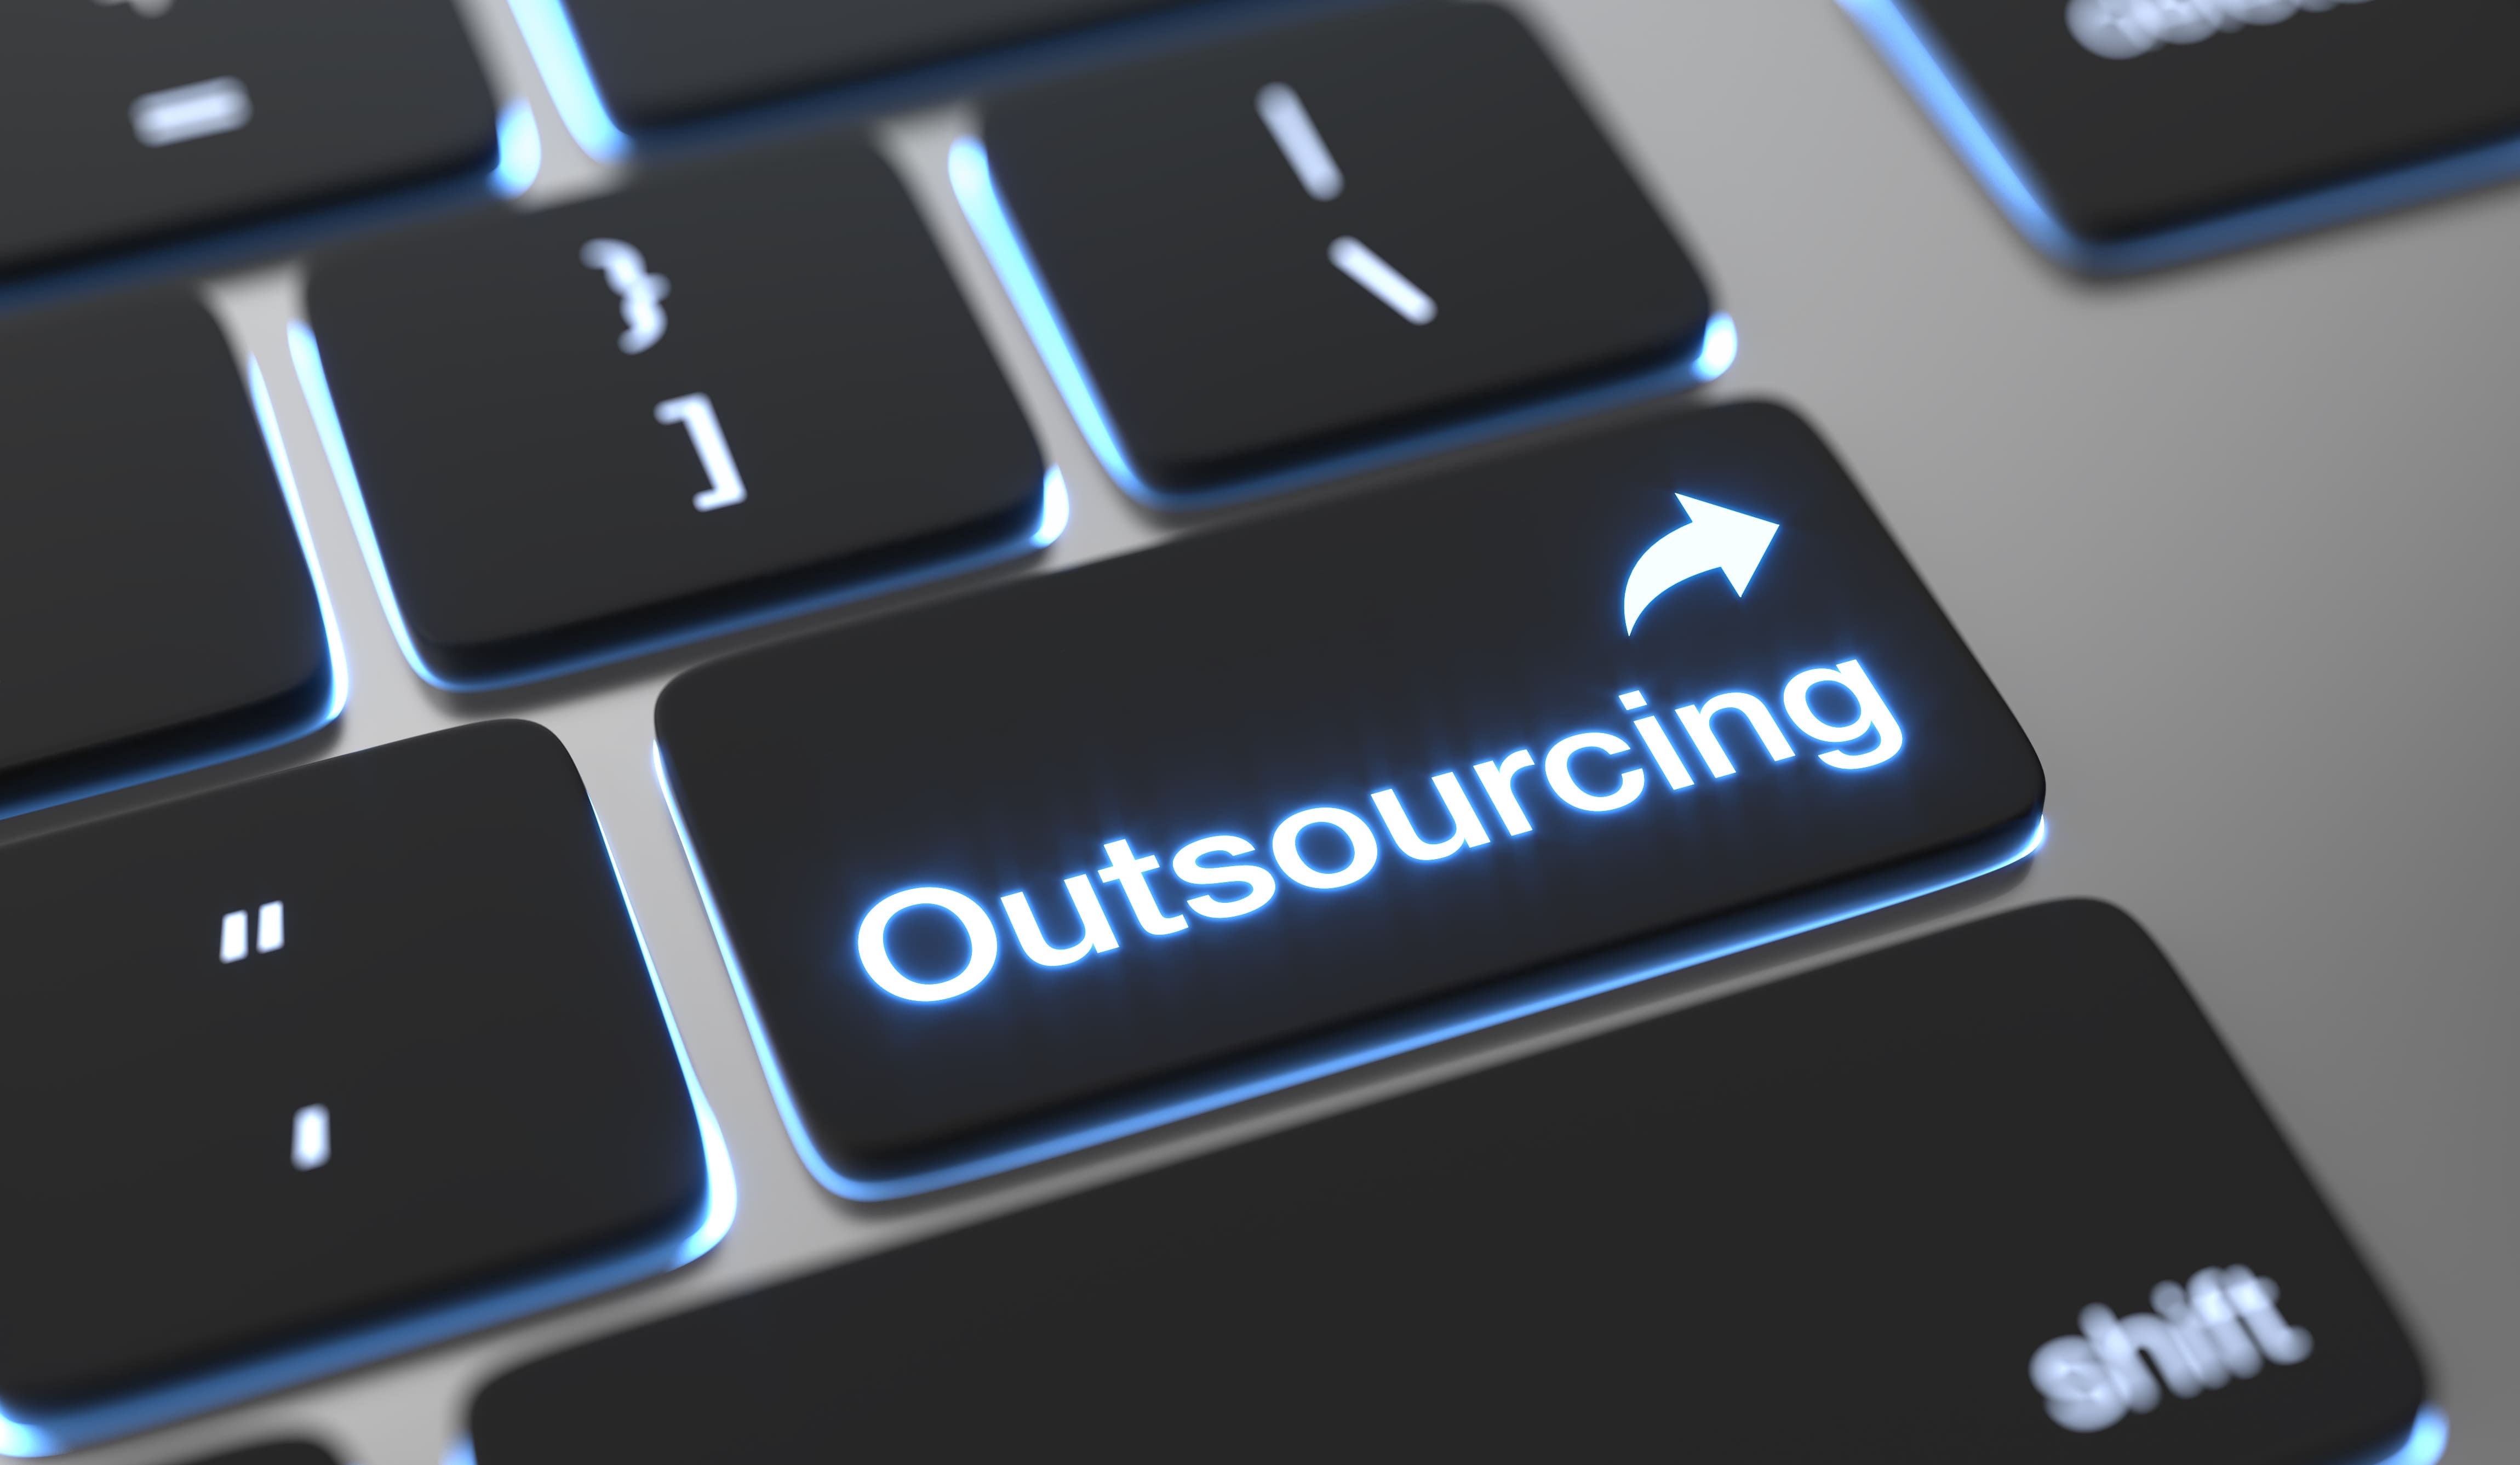 Outsourcing vs Outstaffing: What’s the Difference and Which Should You Choose?   